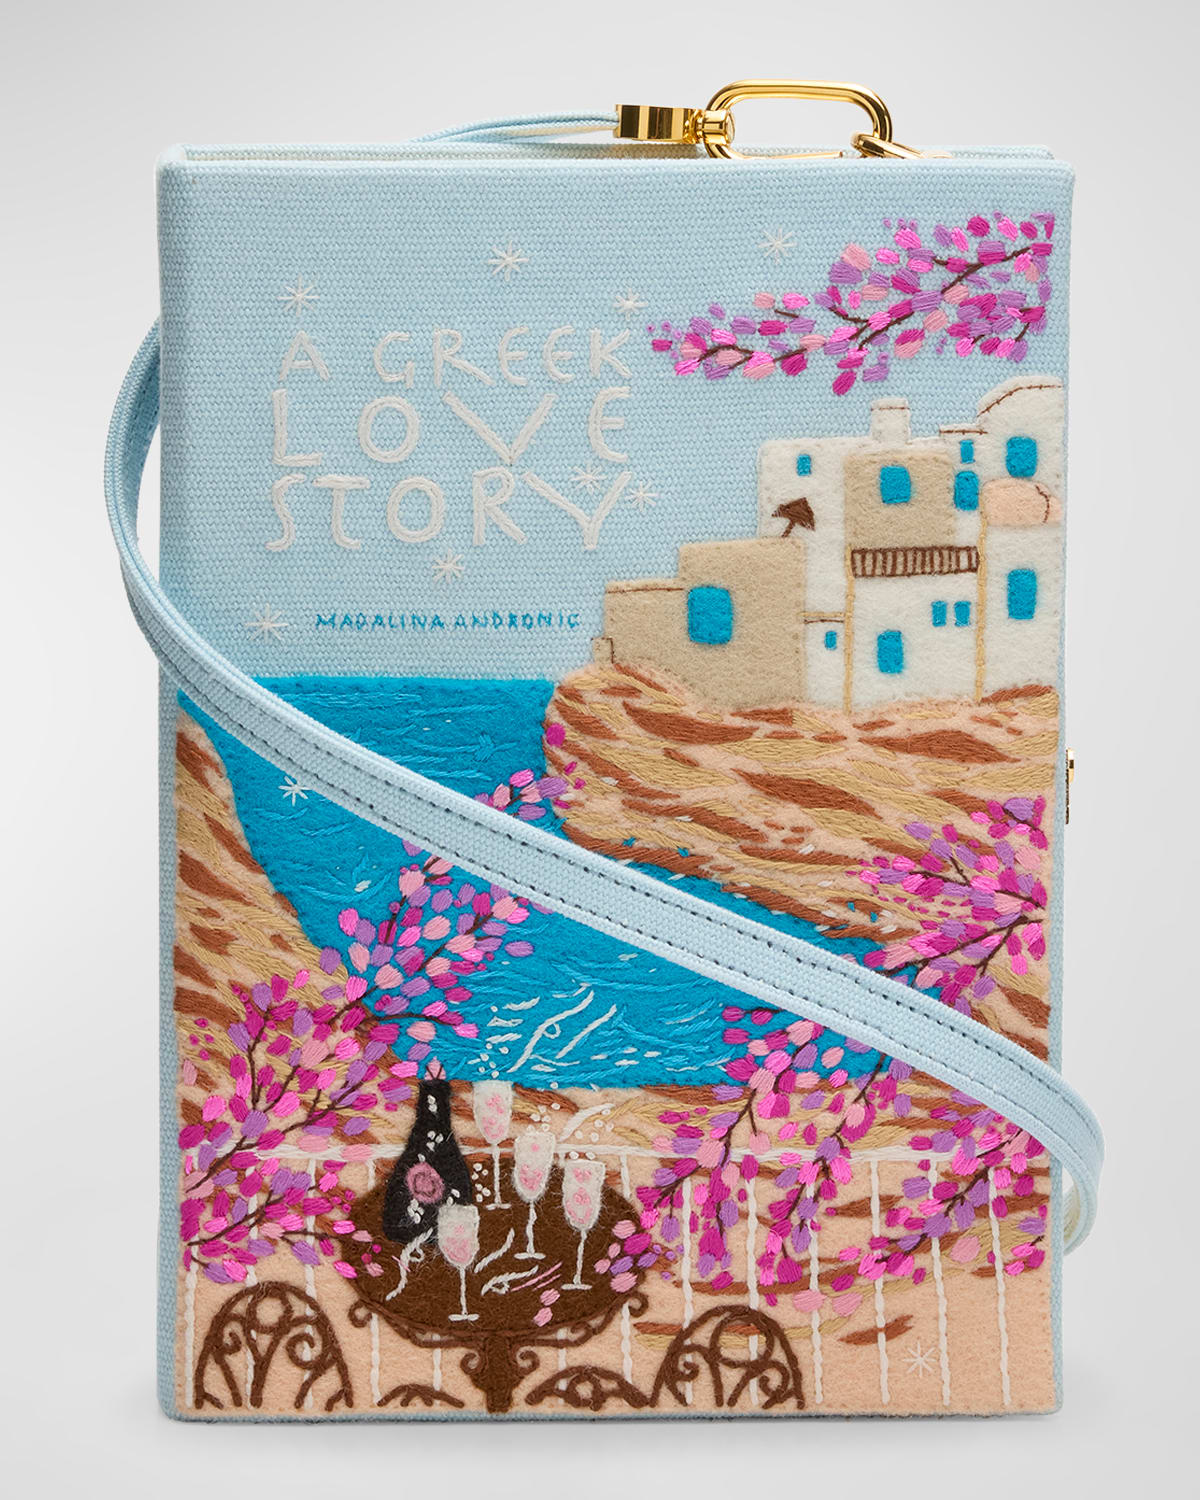 Madalina Andronic's A Greek Love Story Book Clutch Bag